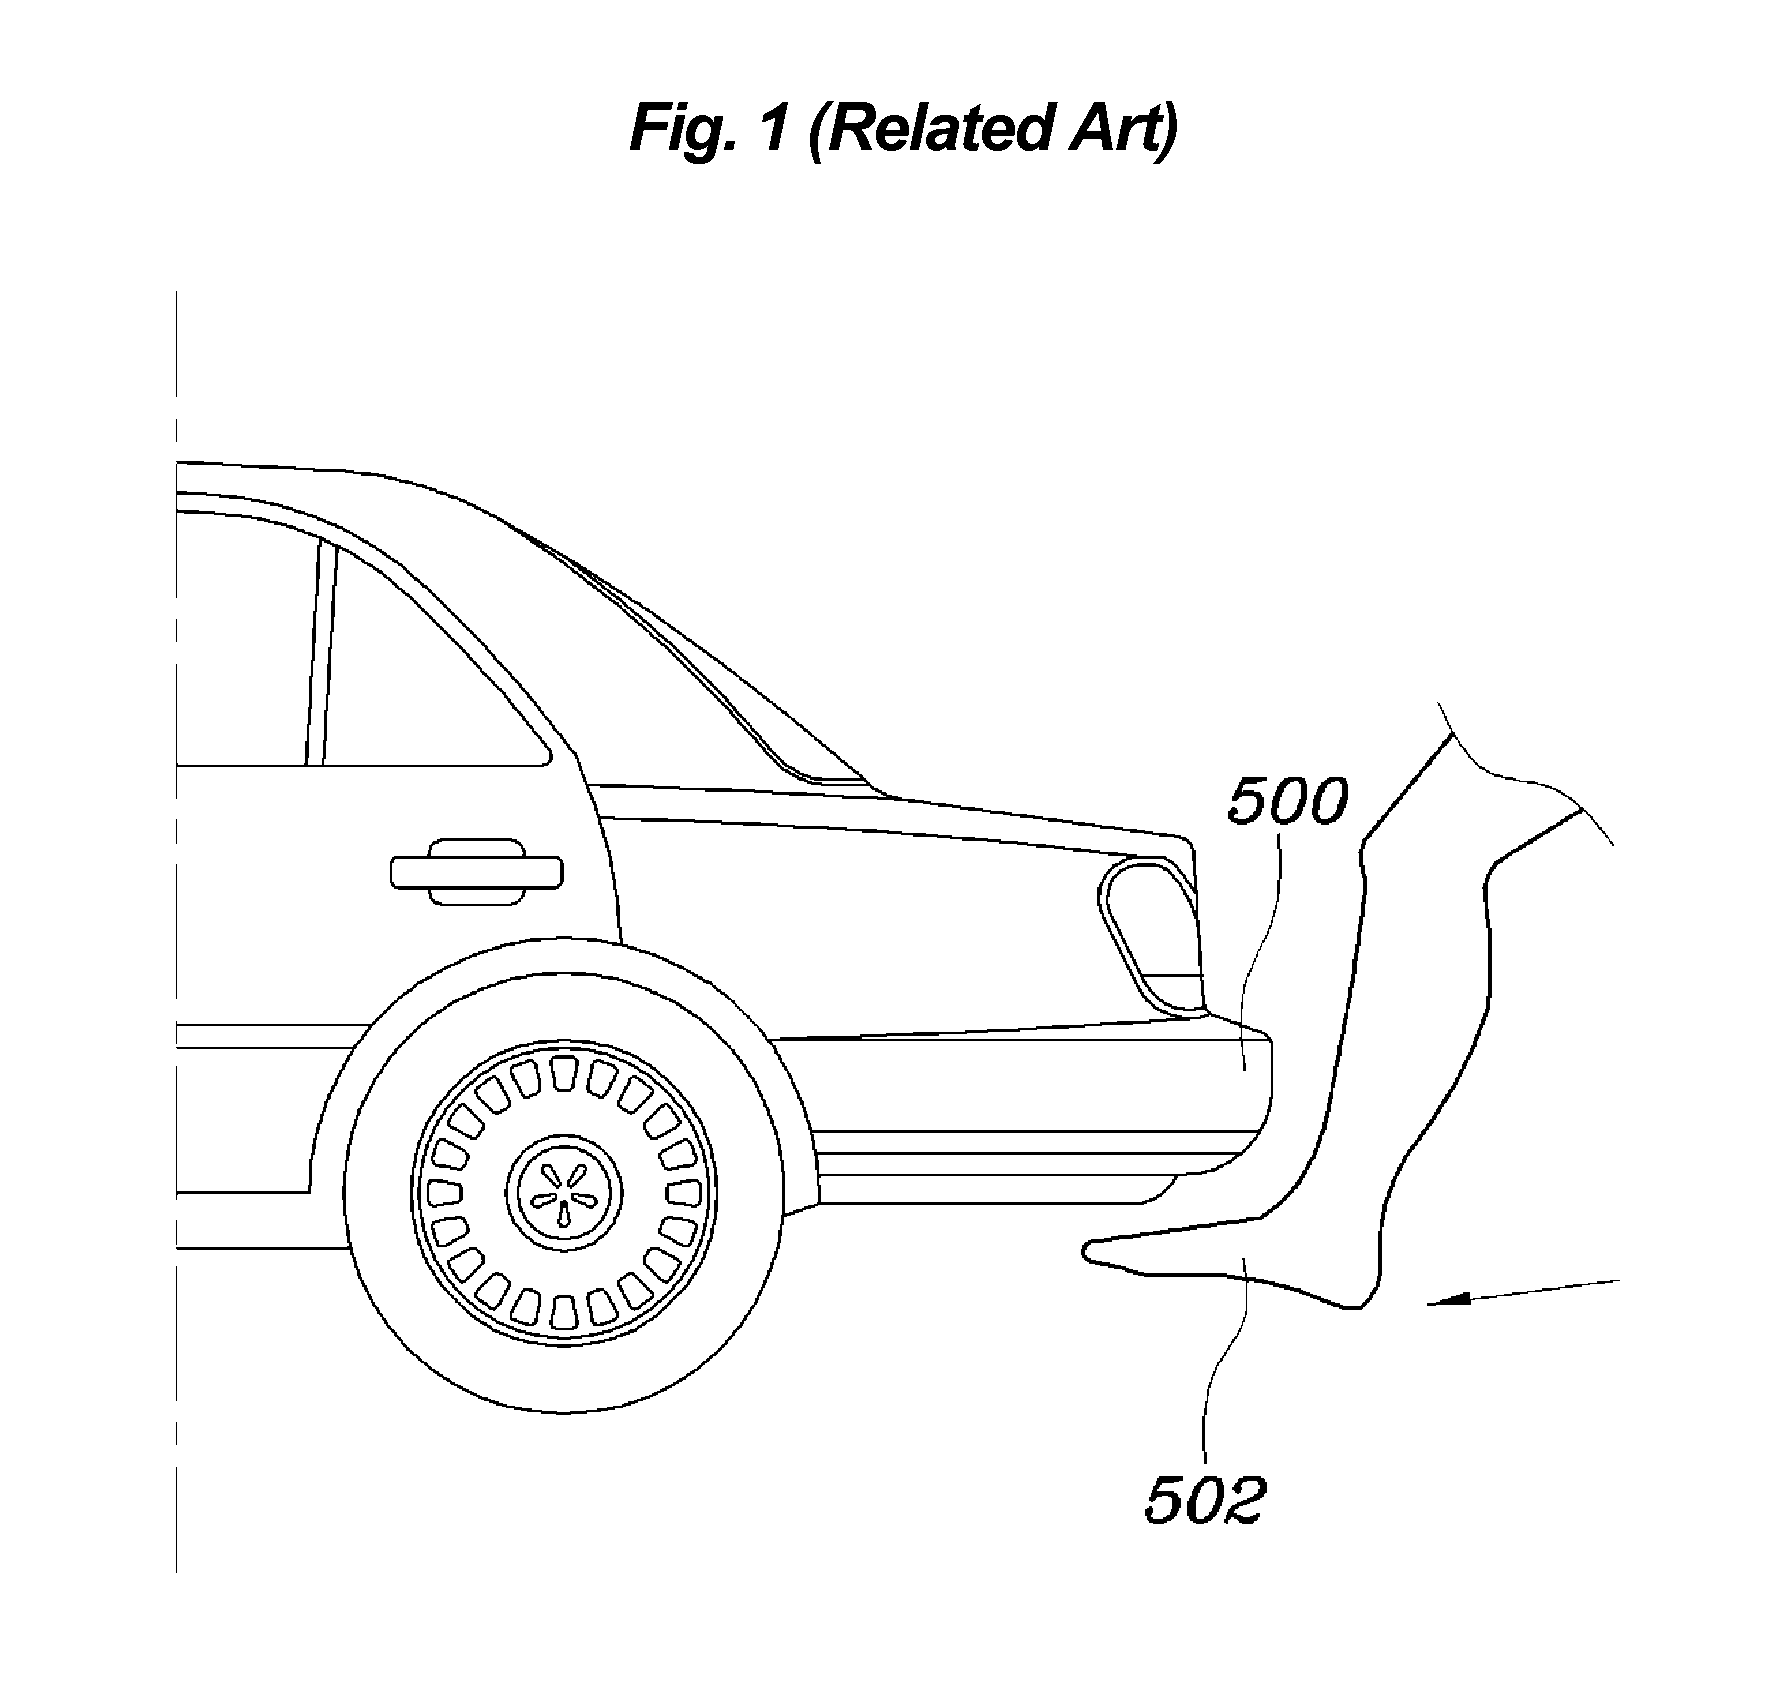 Hands-free system control method for vehicle